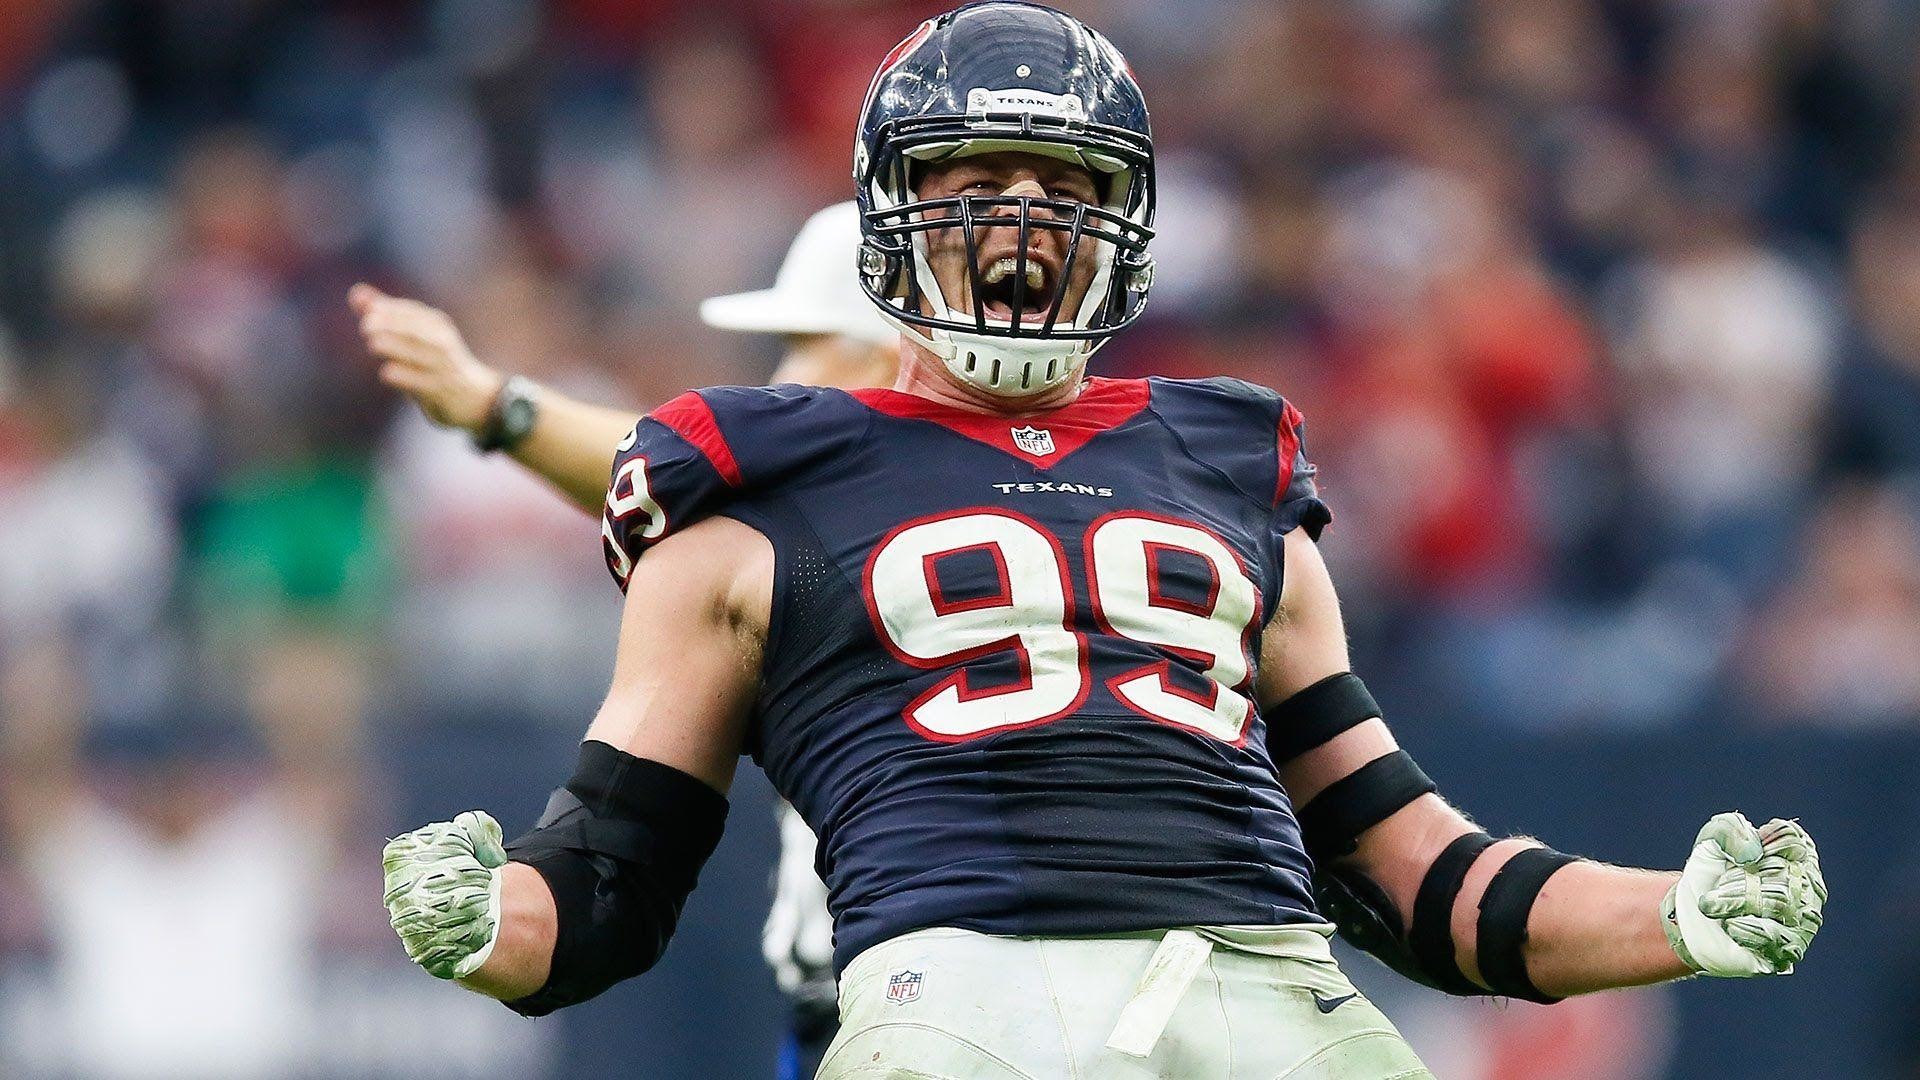 1920x1080 Houston Texans 2016-17 NFL Team Preview | Sports Betting Tips .